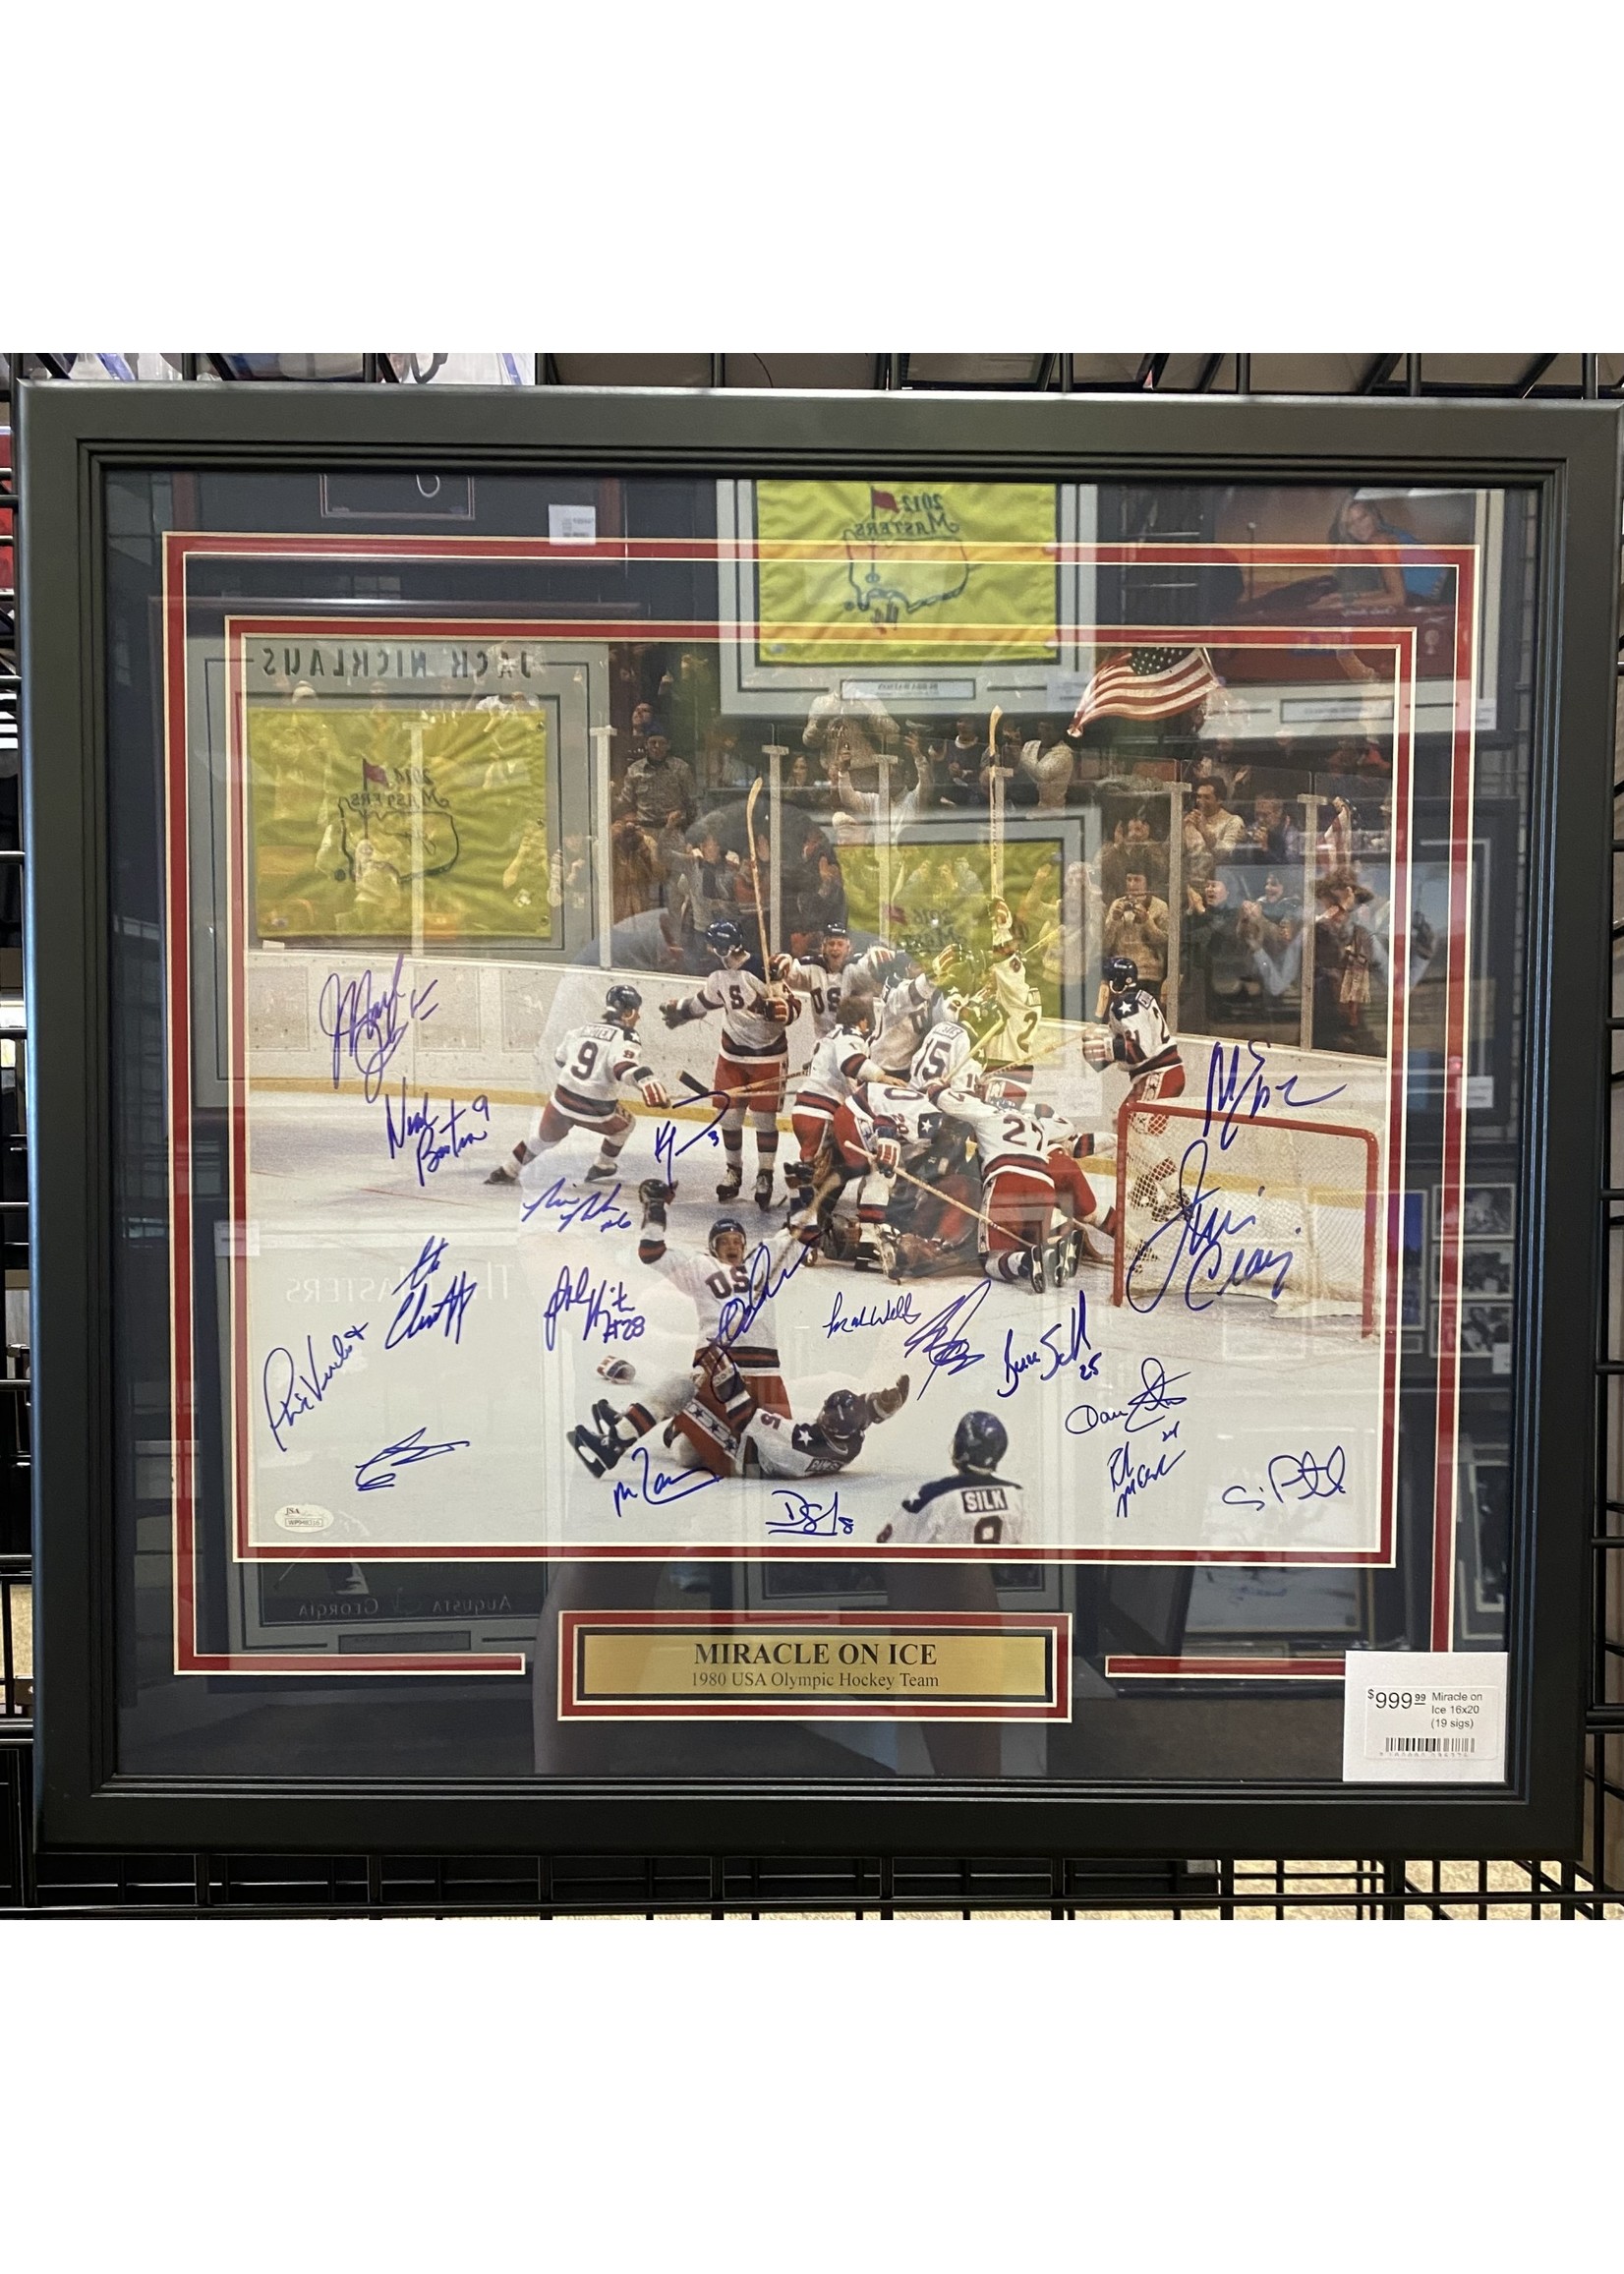 Miracle on Ice 16x20 (19 sigs)